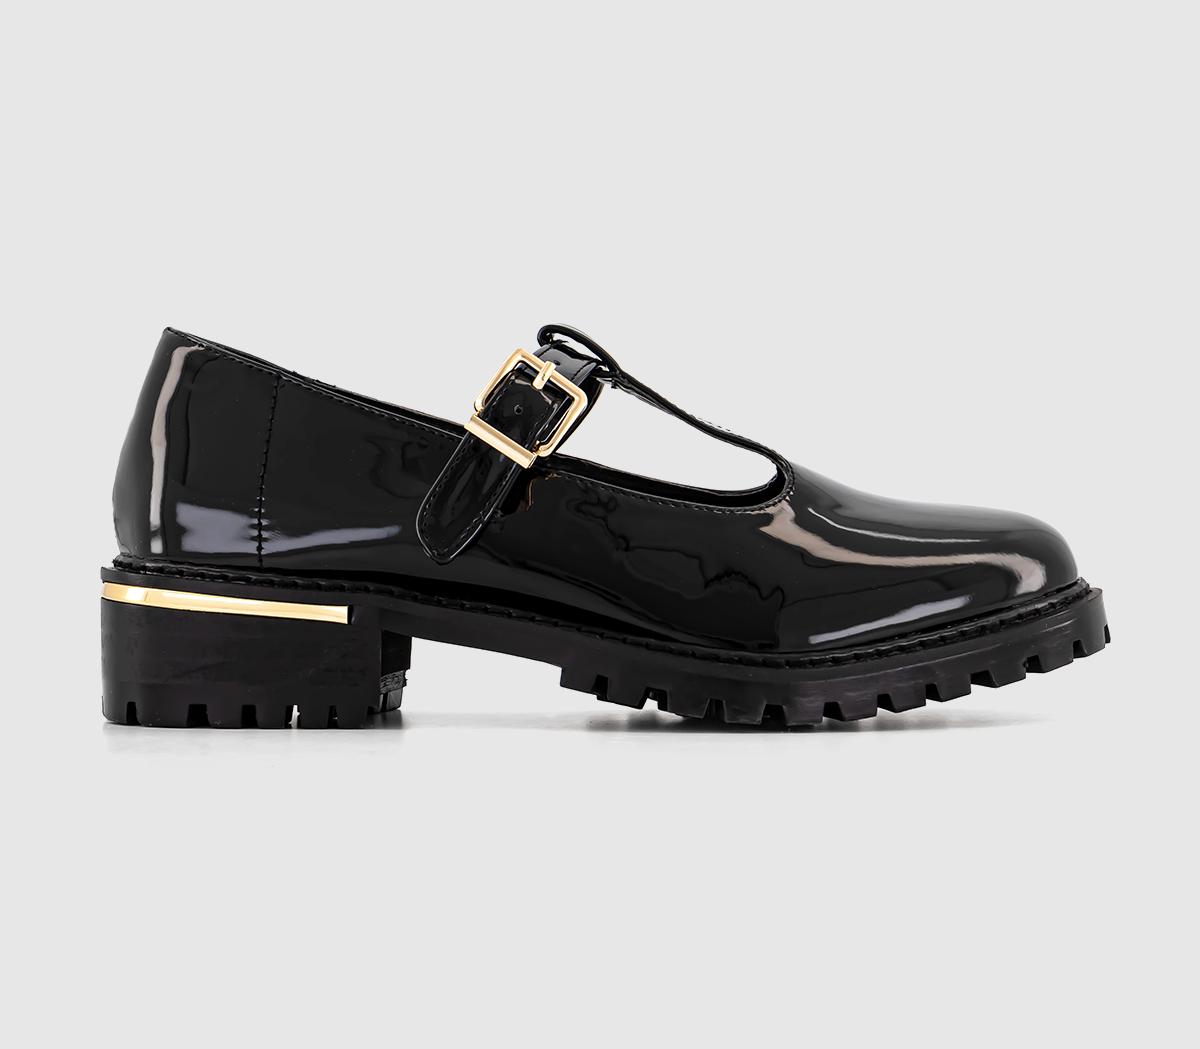 OFFICE Fern Cleated Sole Mary Jane Black Patent - Flat Shoes for Women